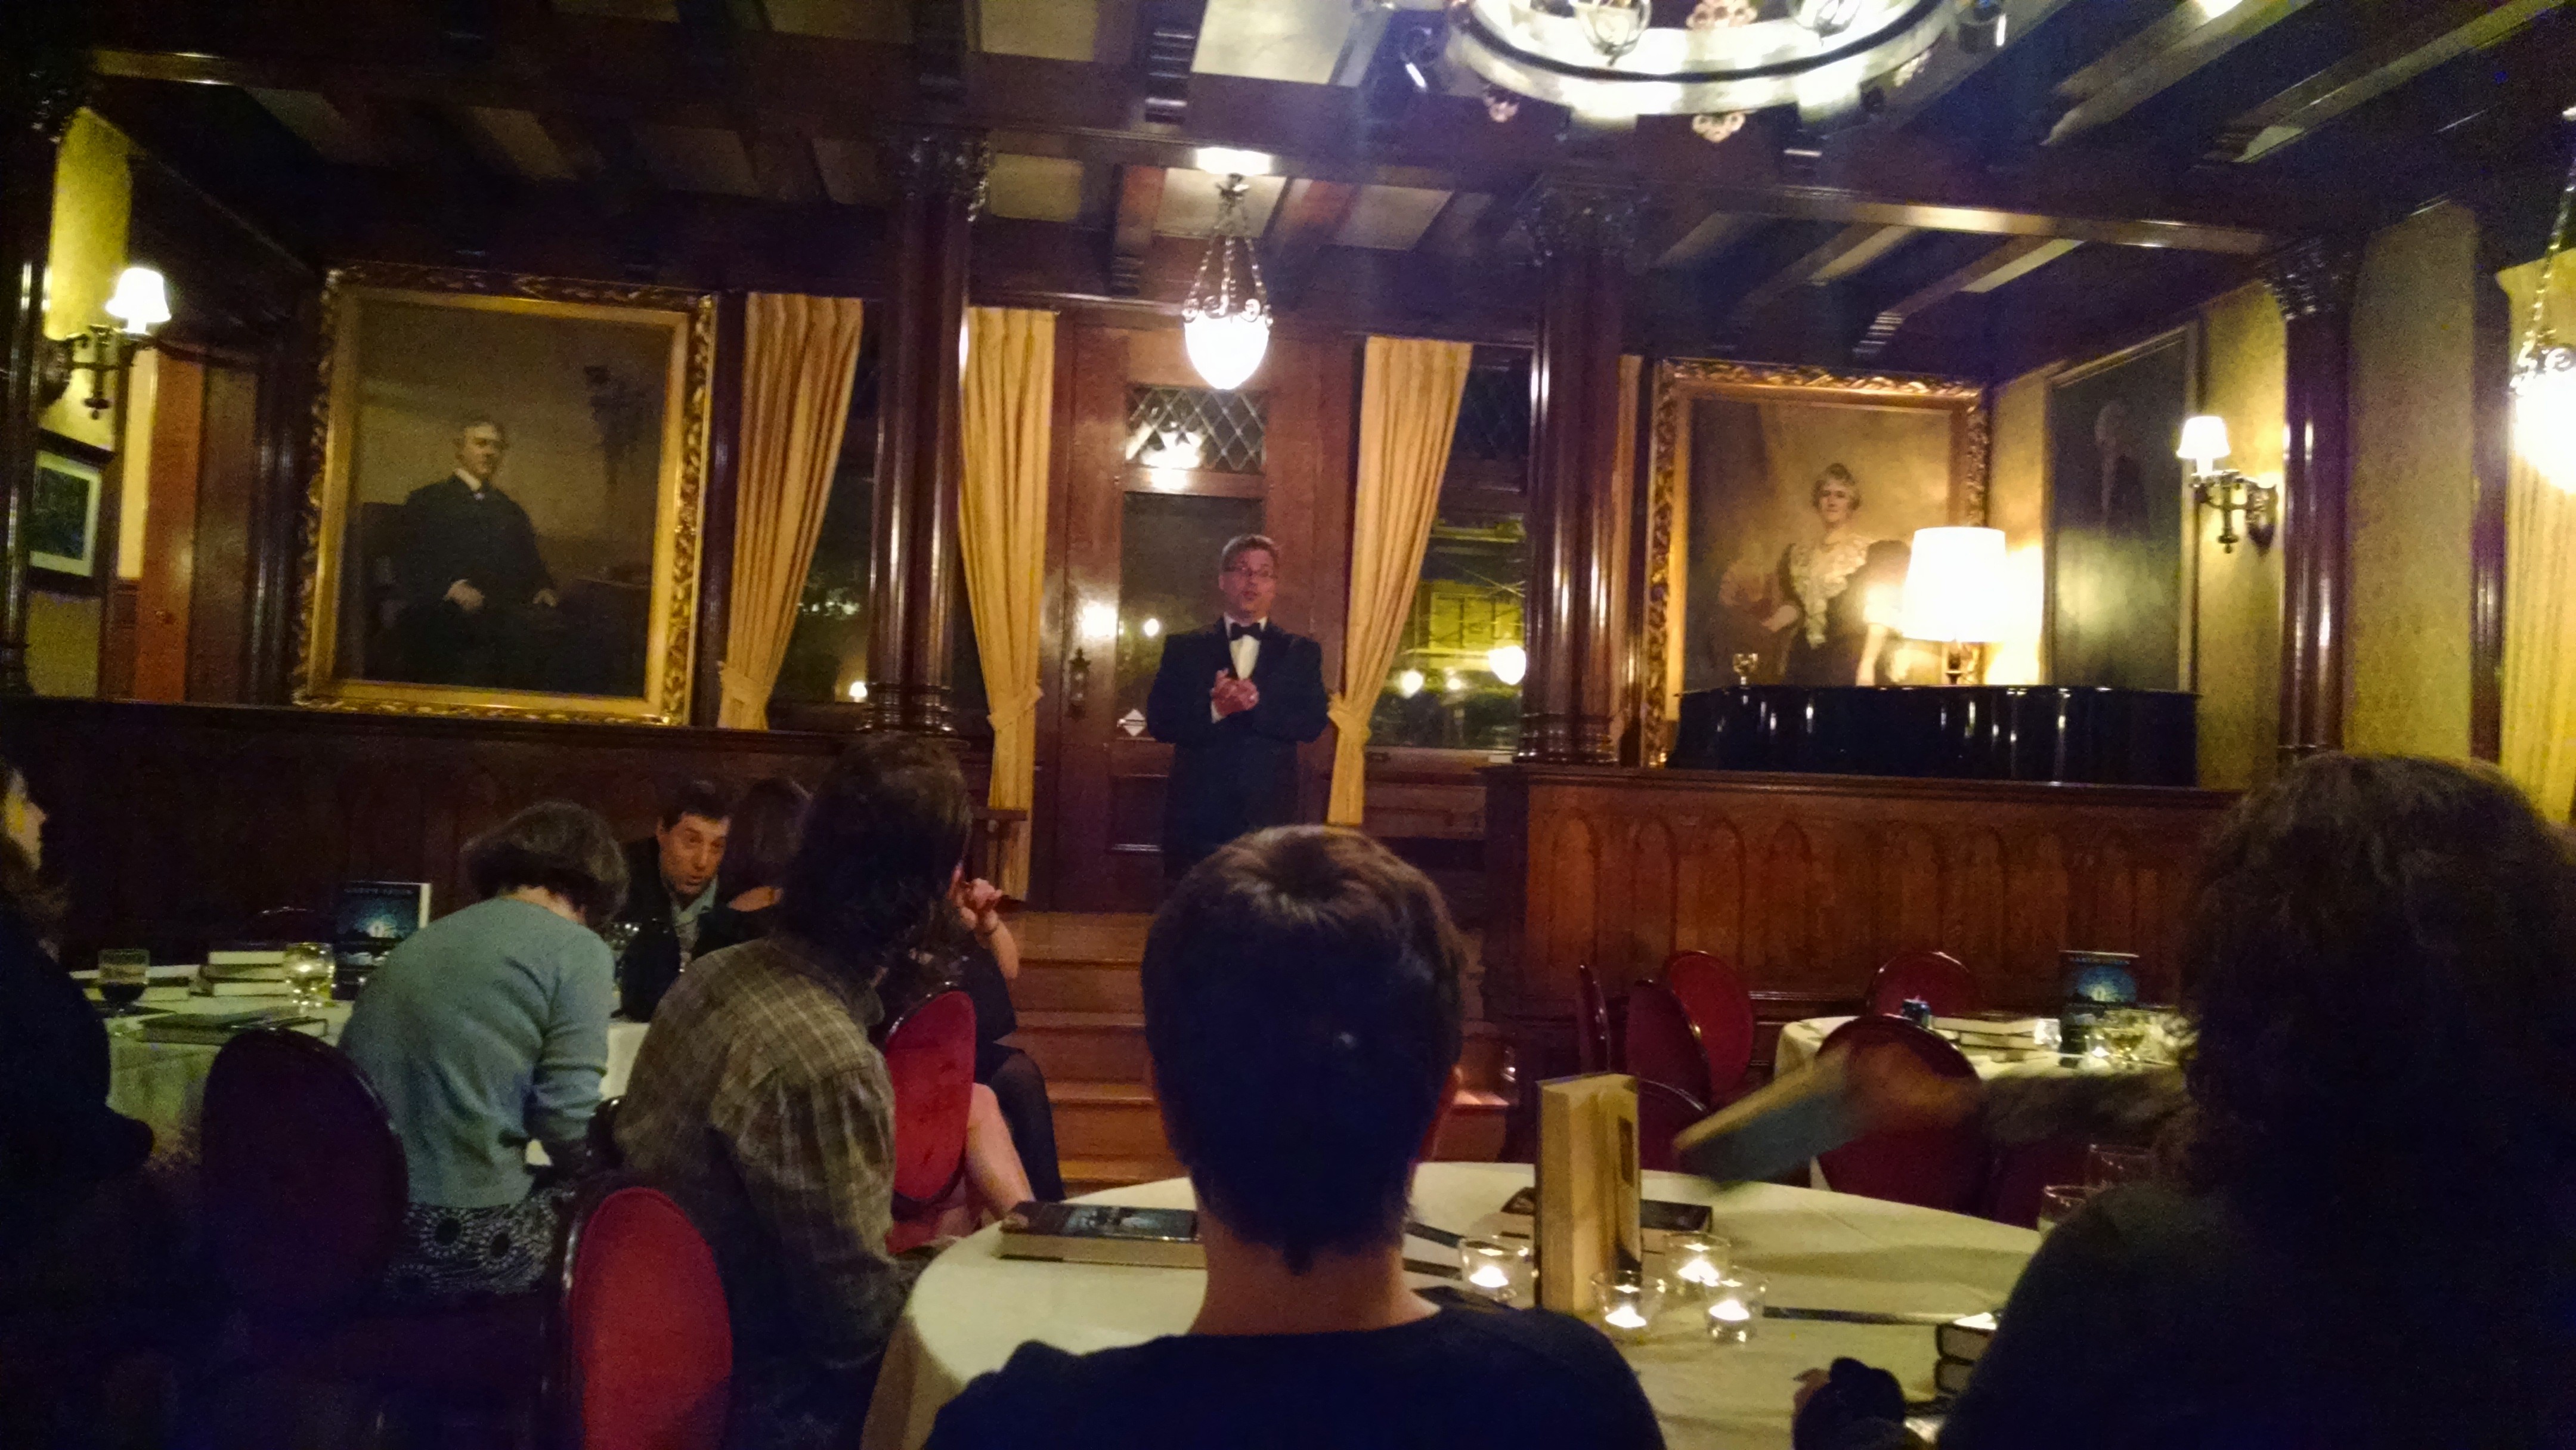 Garth Stein speaks at a launch party for "A Sudden Light" at the Stimson Green Mansion-- a gorgeous, historical, maybe-haunted house in Seattle